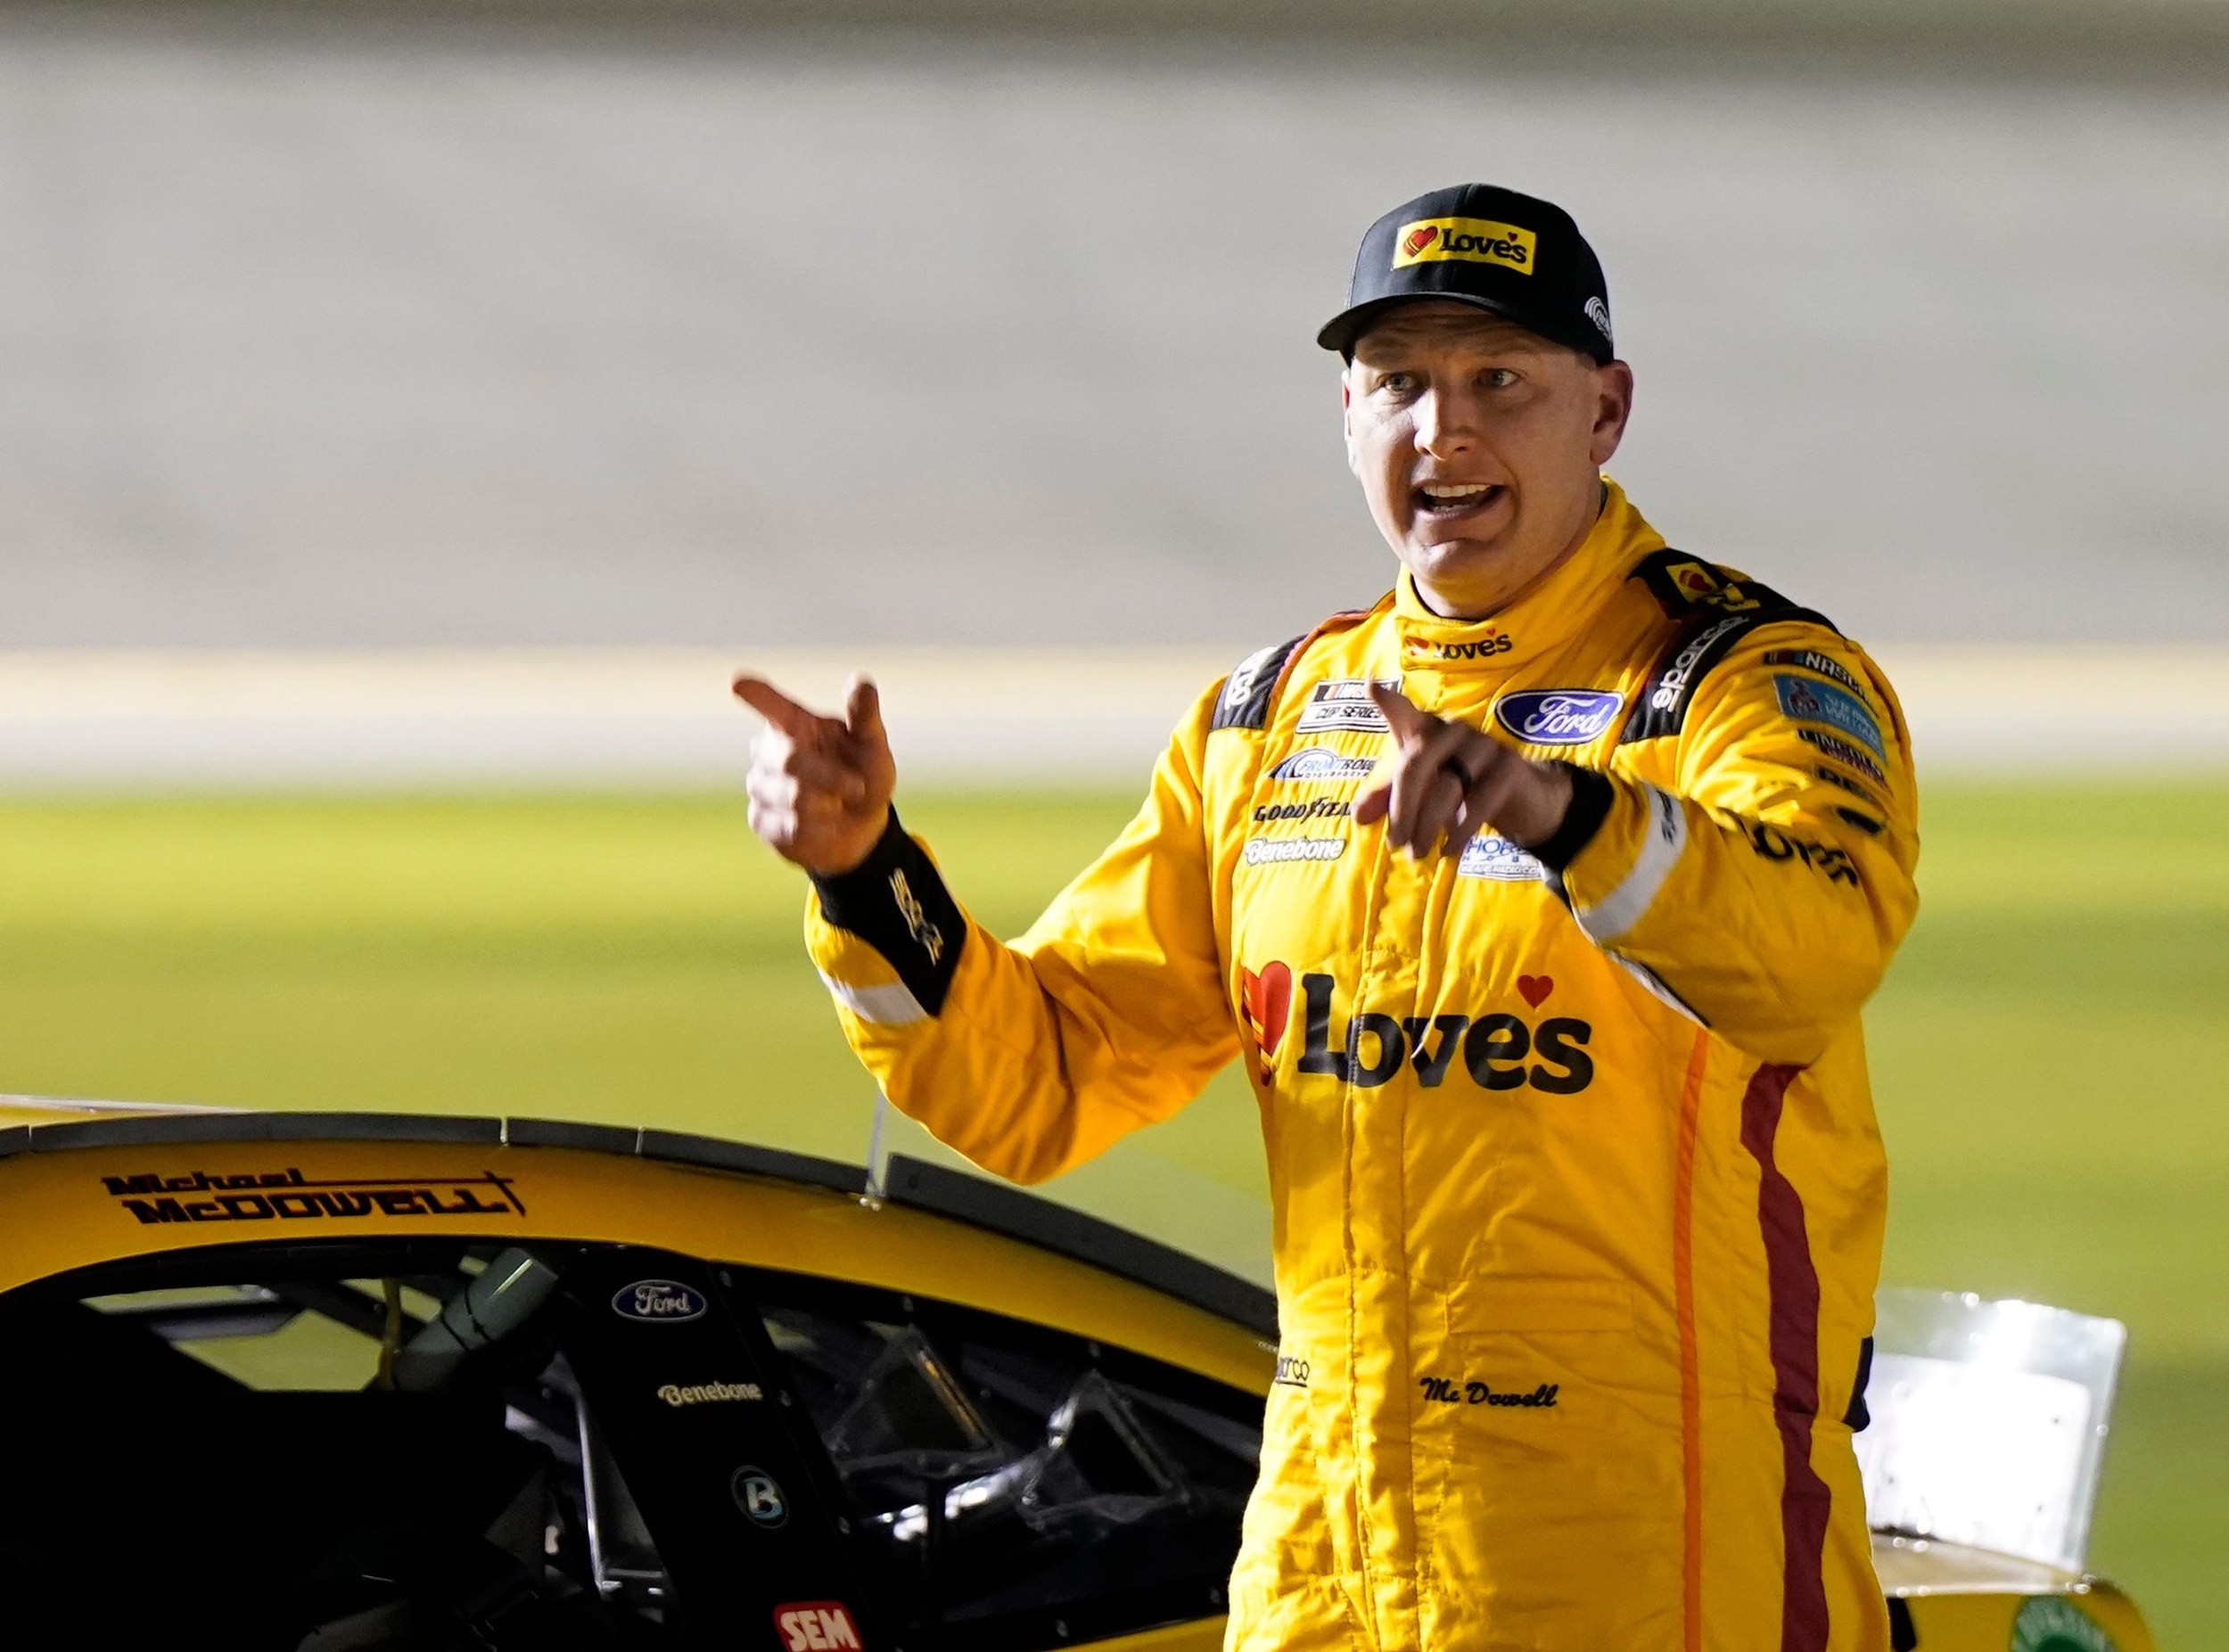 467th time is the charm: michael mcdowell earns first career cup series pole at atlanta